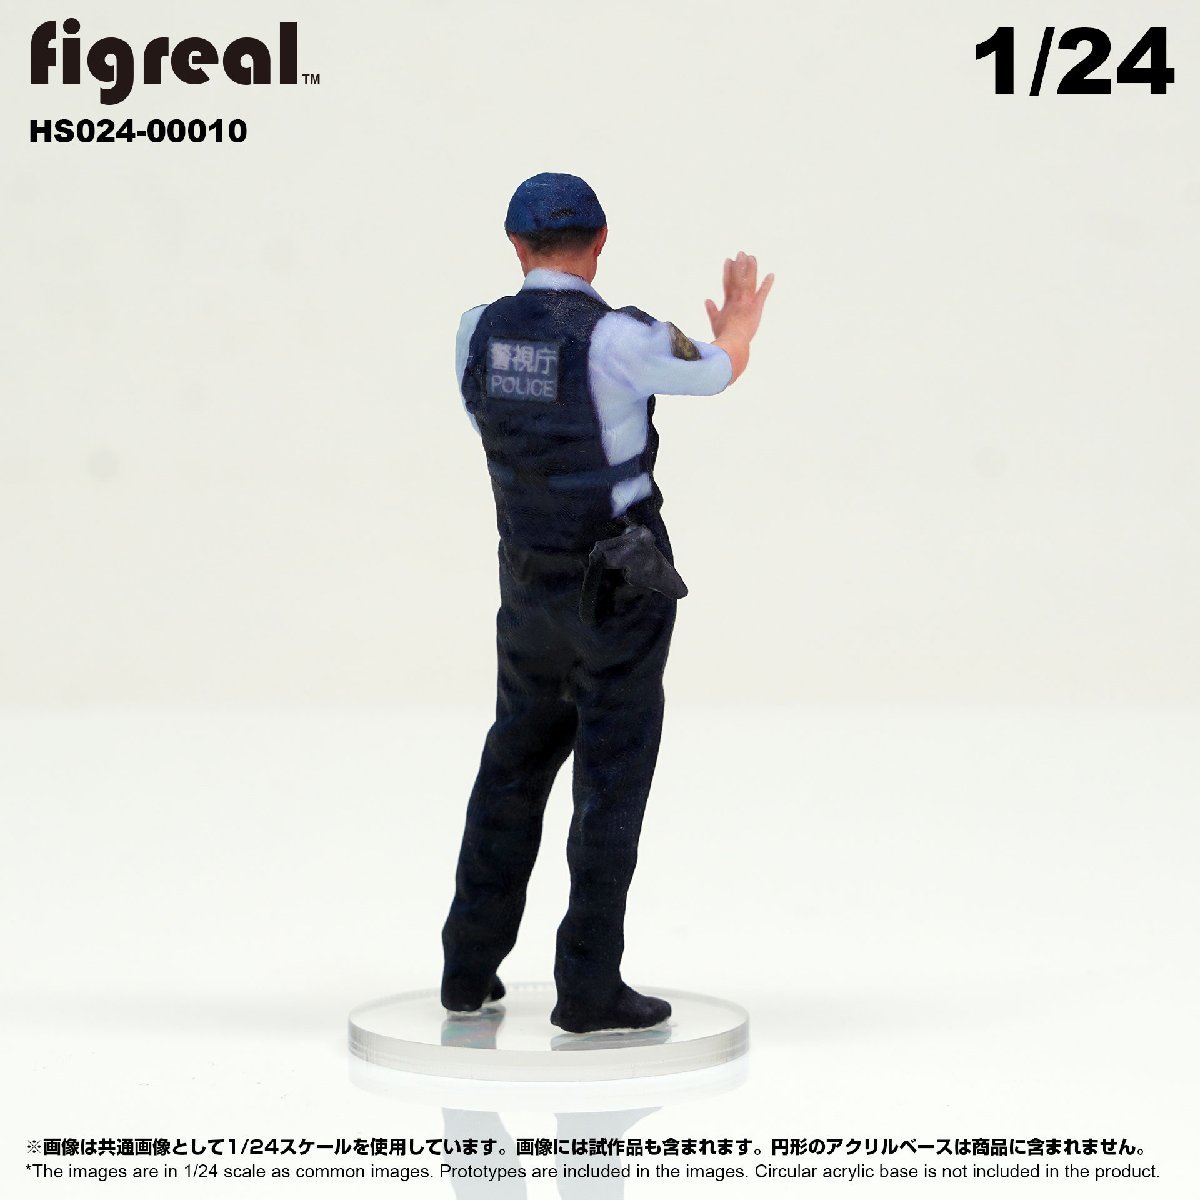 HS024-00010 figreal 日本警察官 1/24 高精細フィギュア_画像5